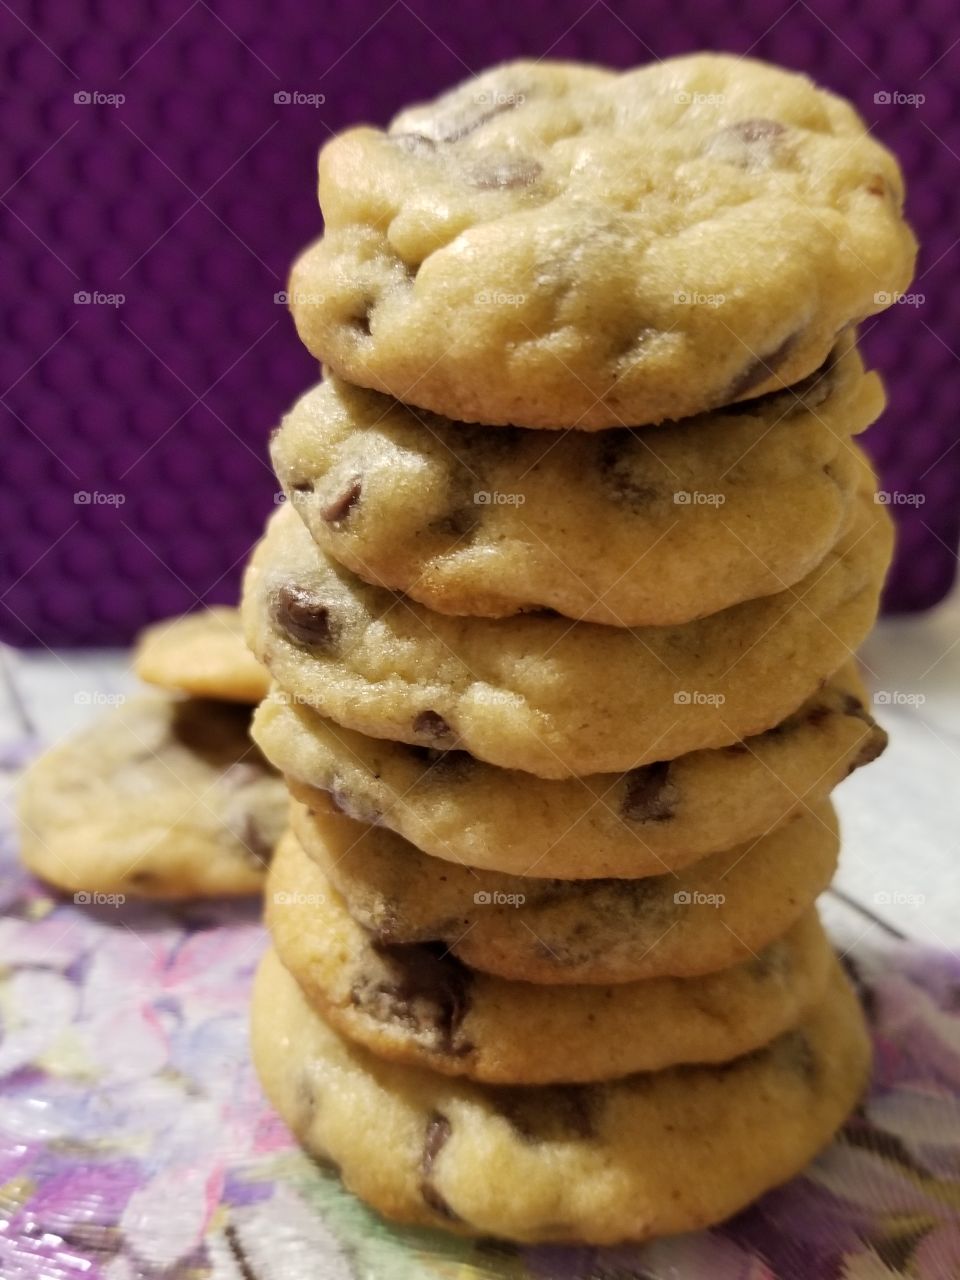 chocolate chip cookies made groom scratch